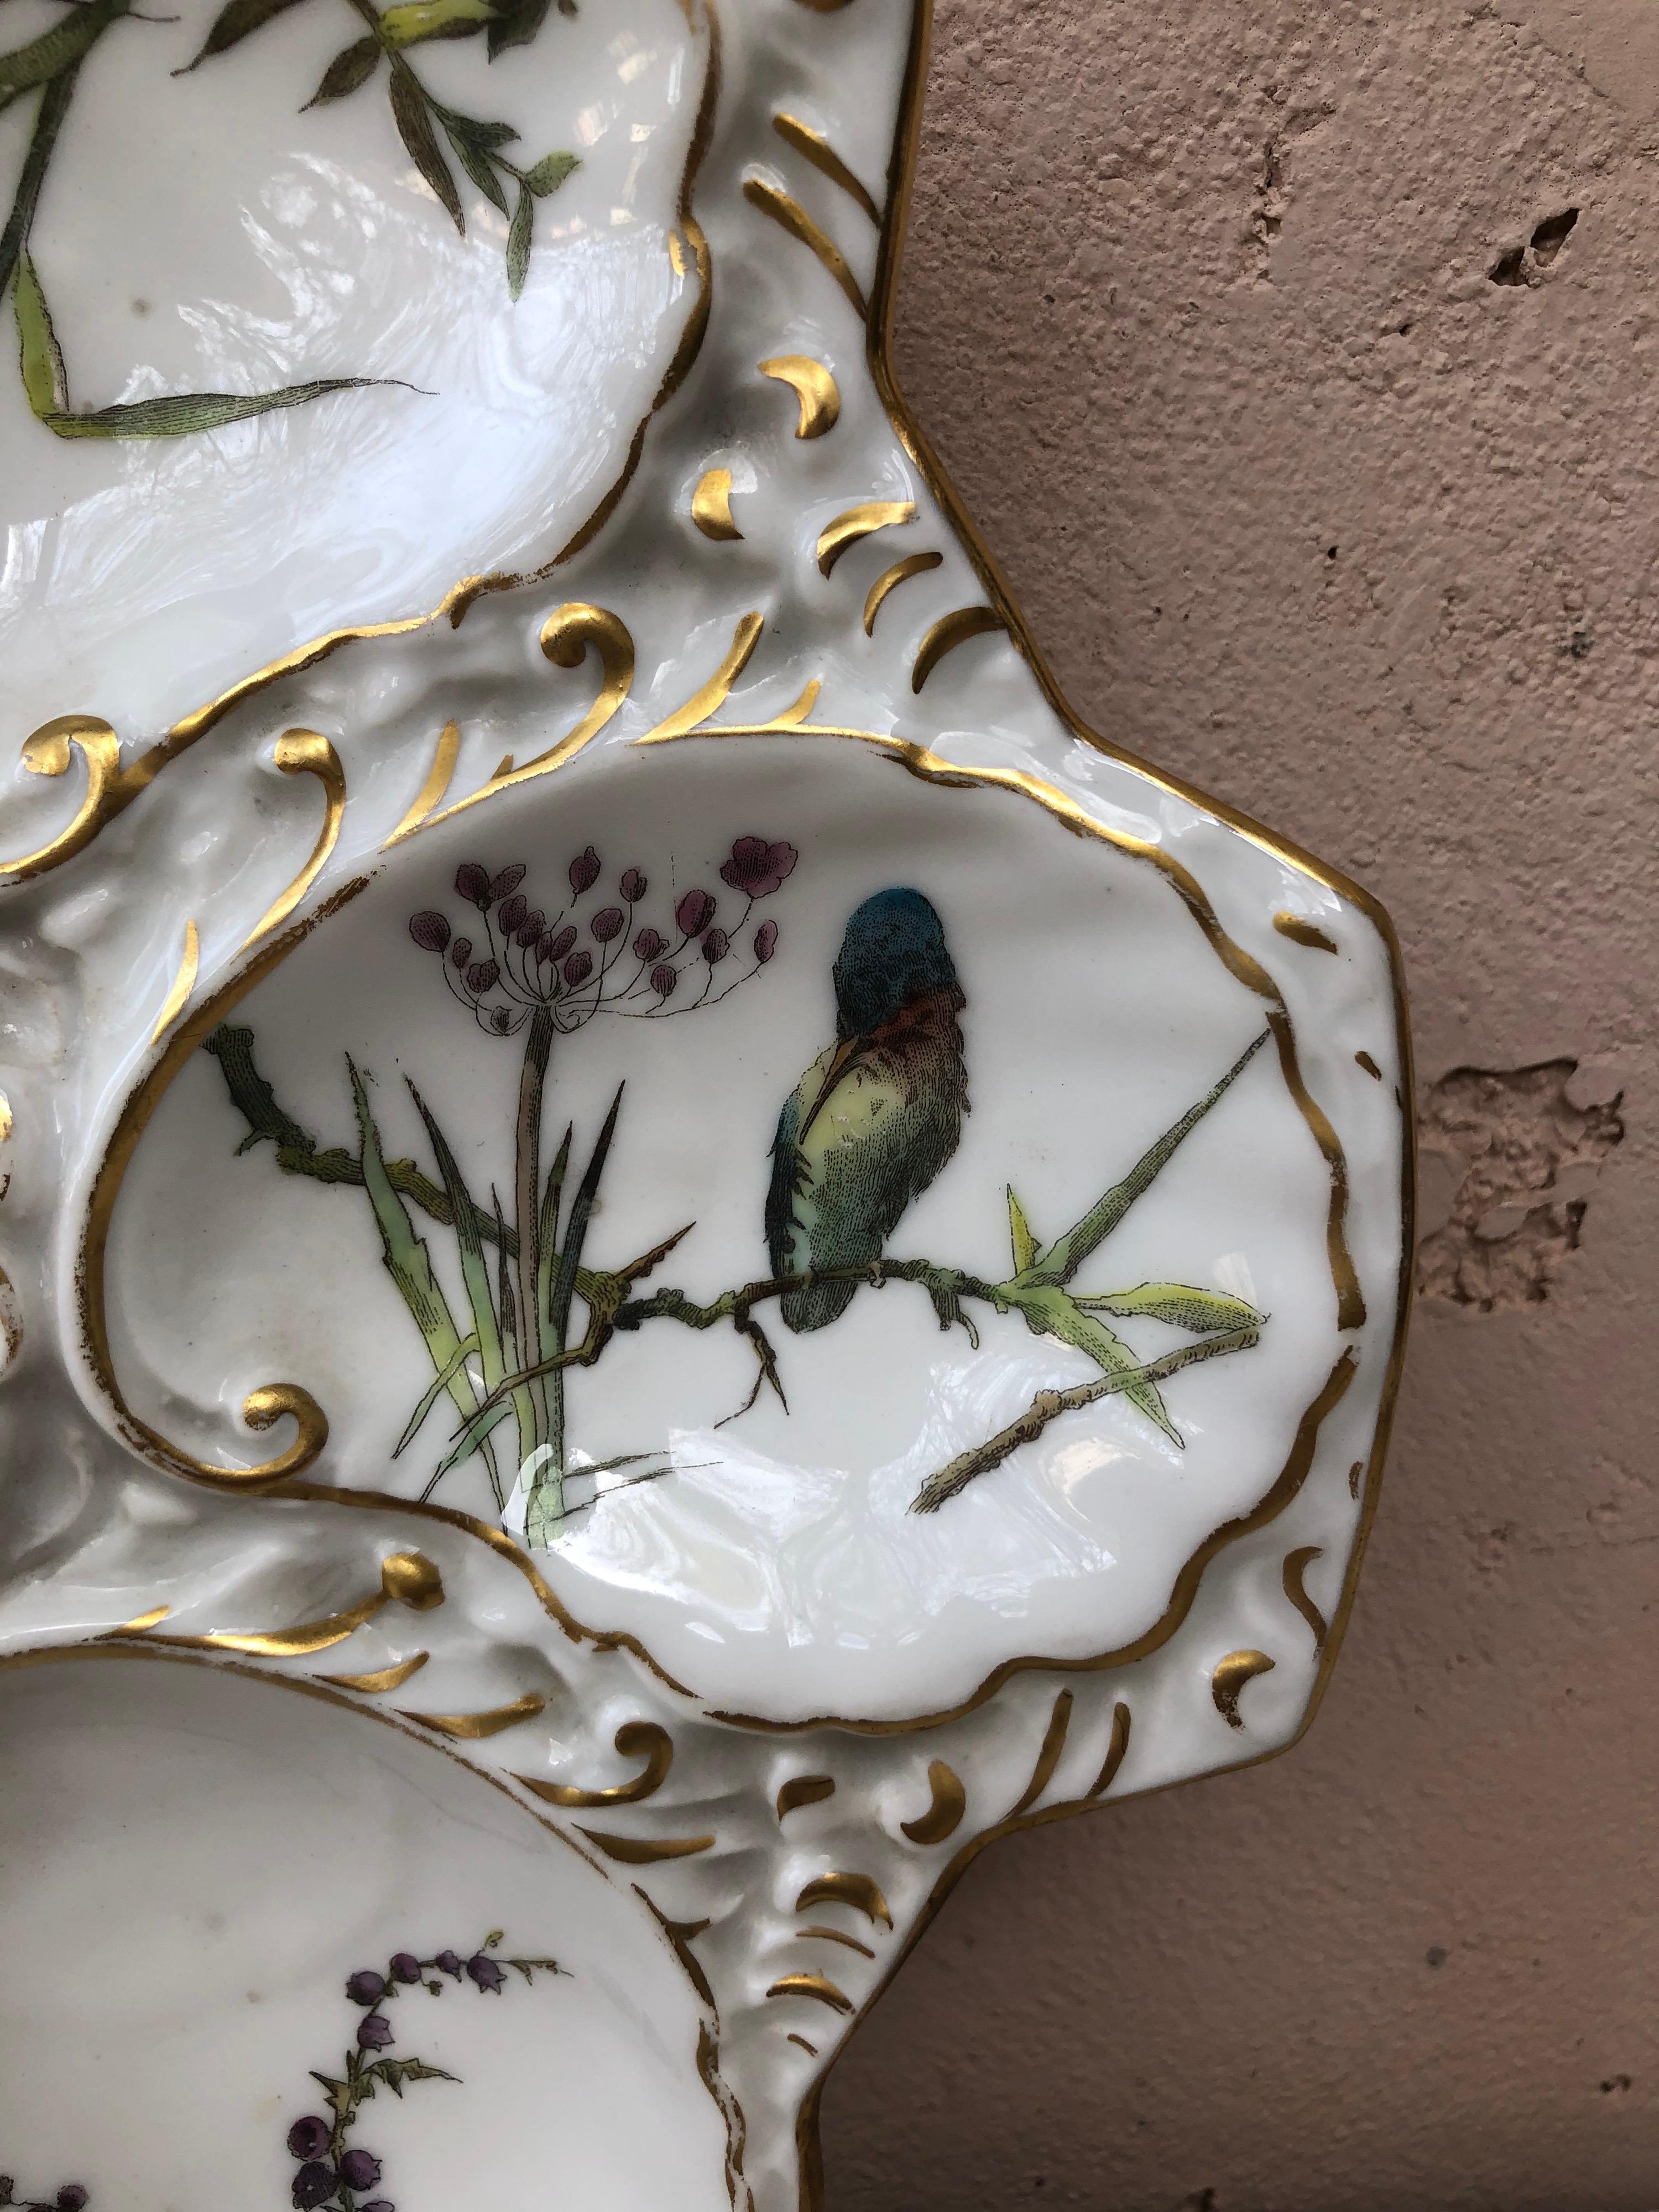 Rare Porcelain oyster plate signed Limoges Guerin & Company Paris.
Each shell have a different painting with birds or plants.